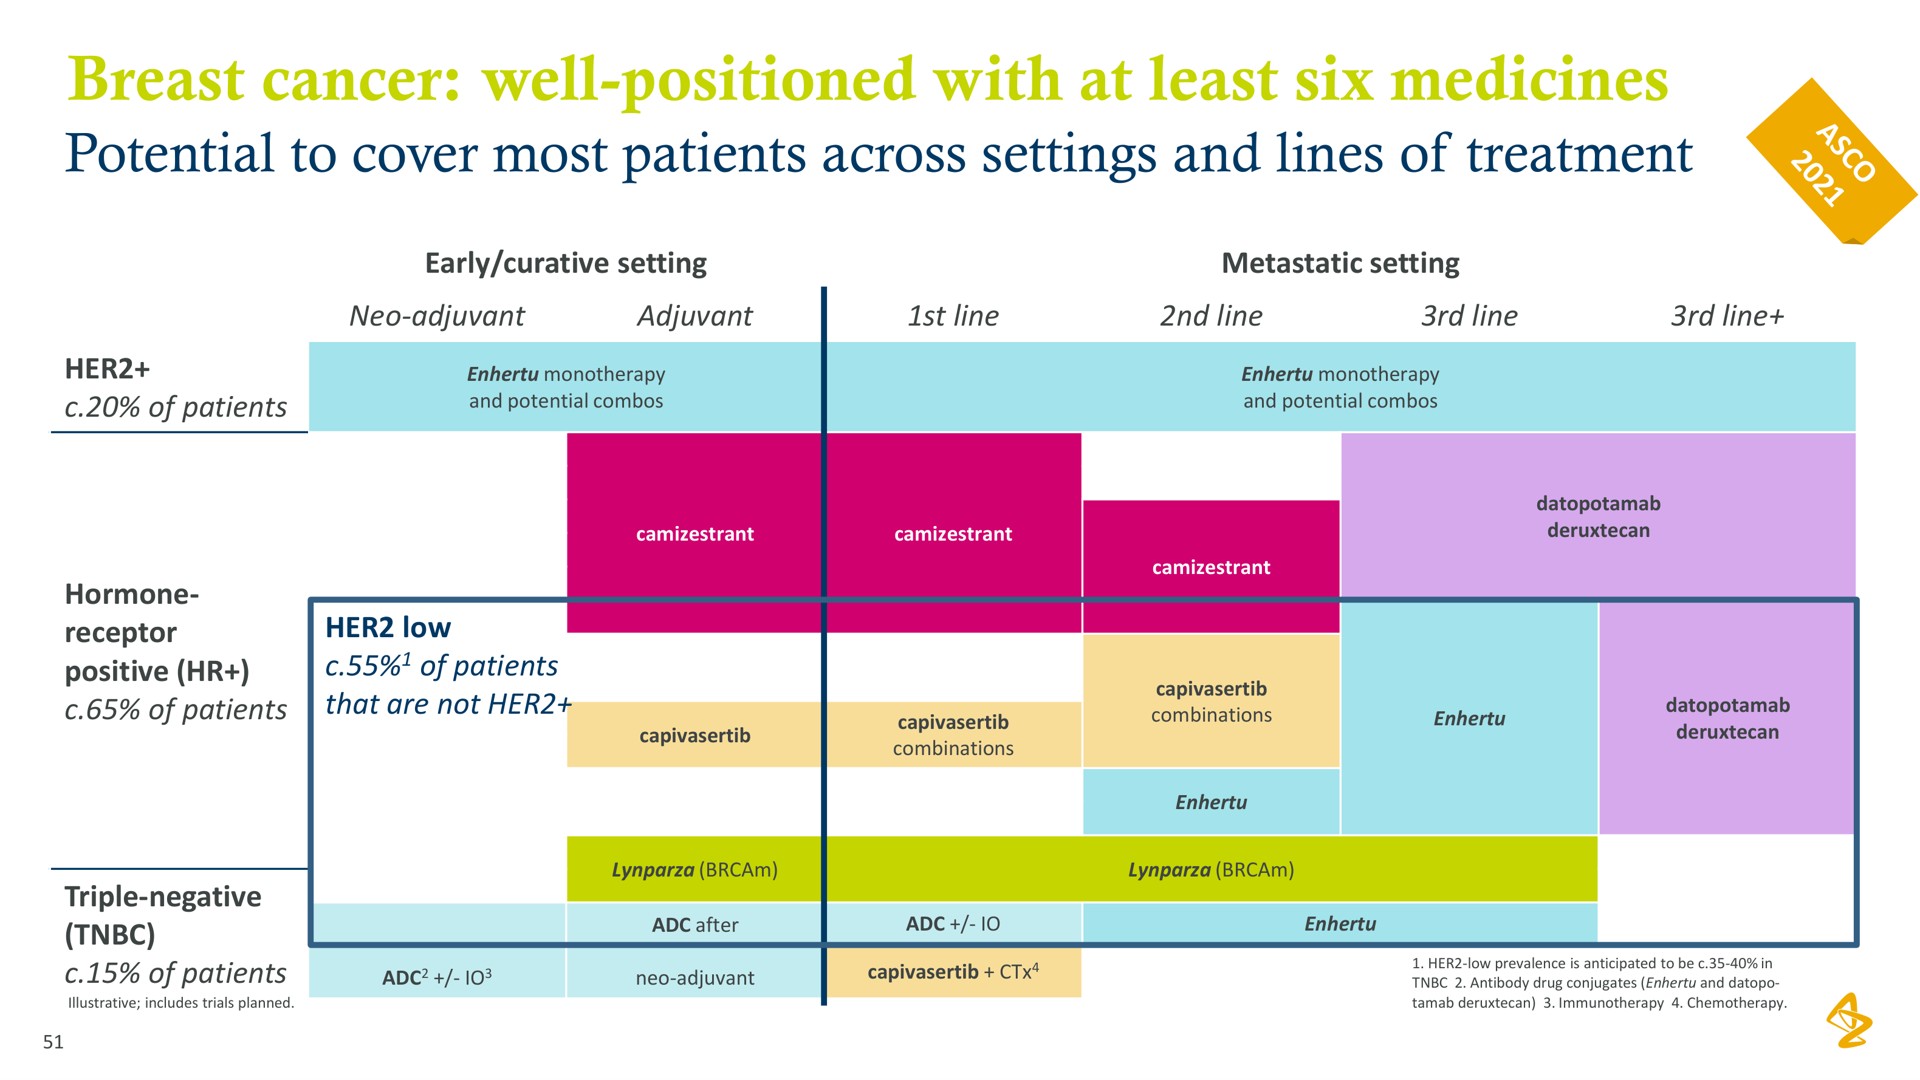 breast cancer well positioned with at least six medicines potential to cover most patients across settings and lines of treatment | AstraZeneca